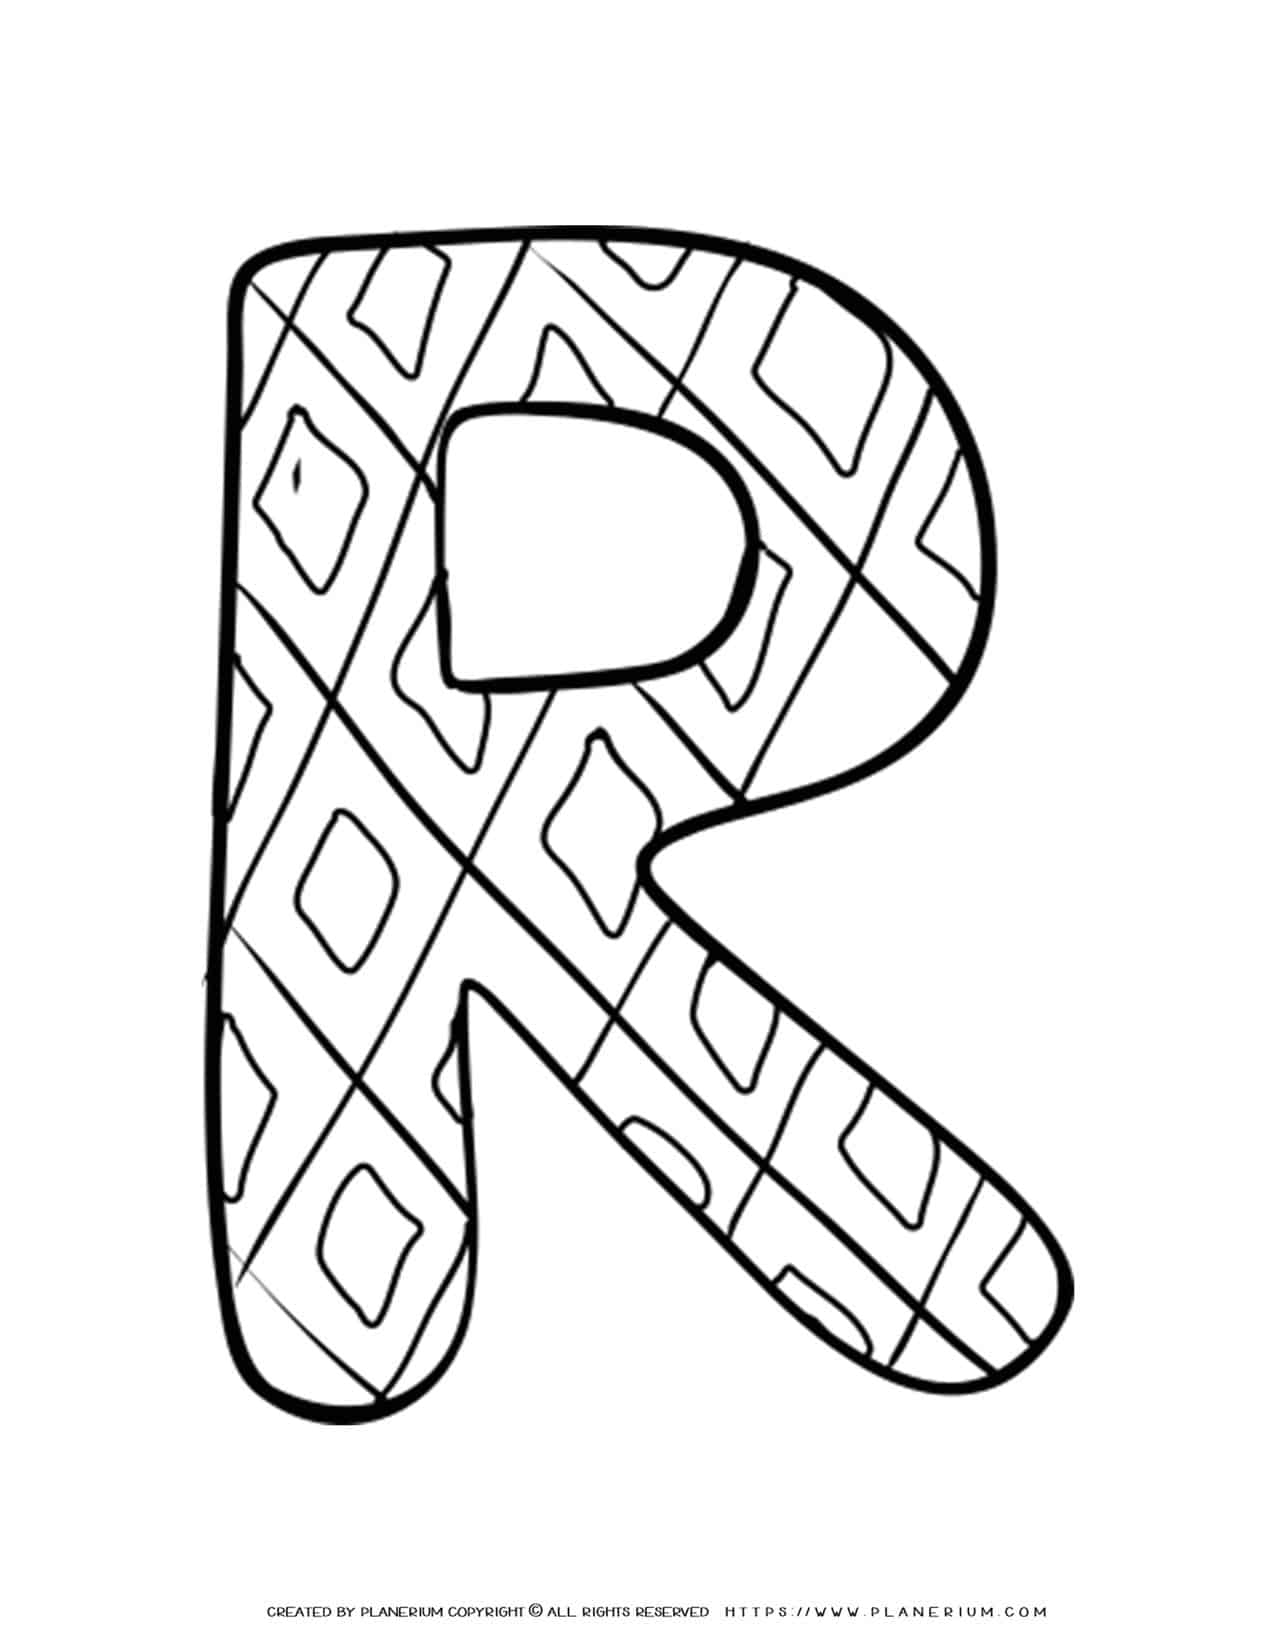 English Alphabet - Capital R with Pattern - Coloring Page | Planerium